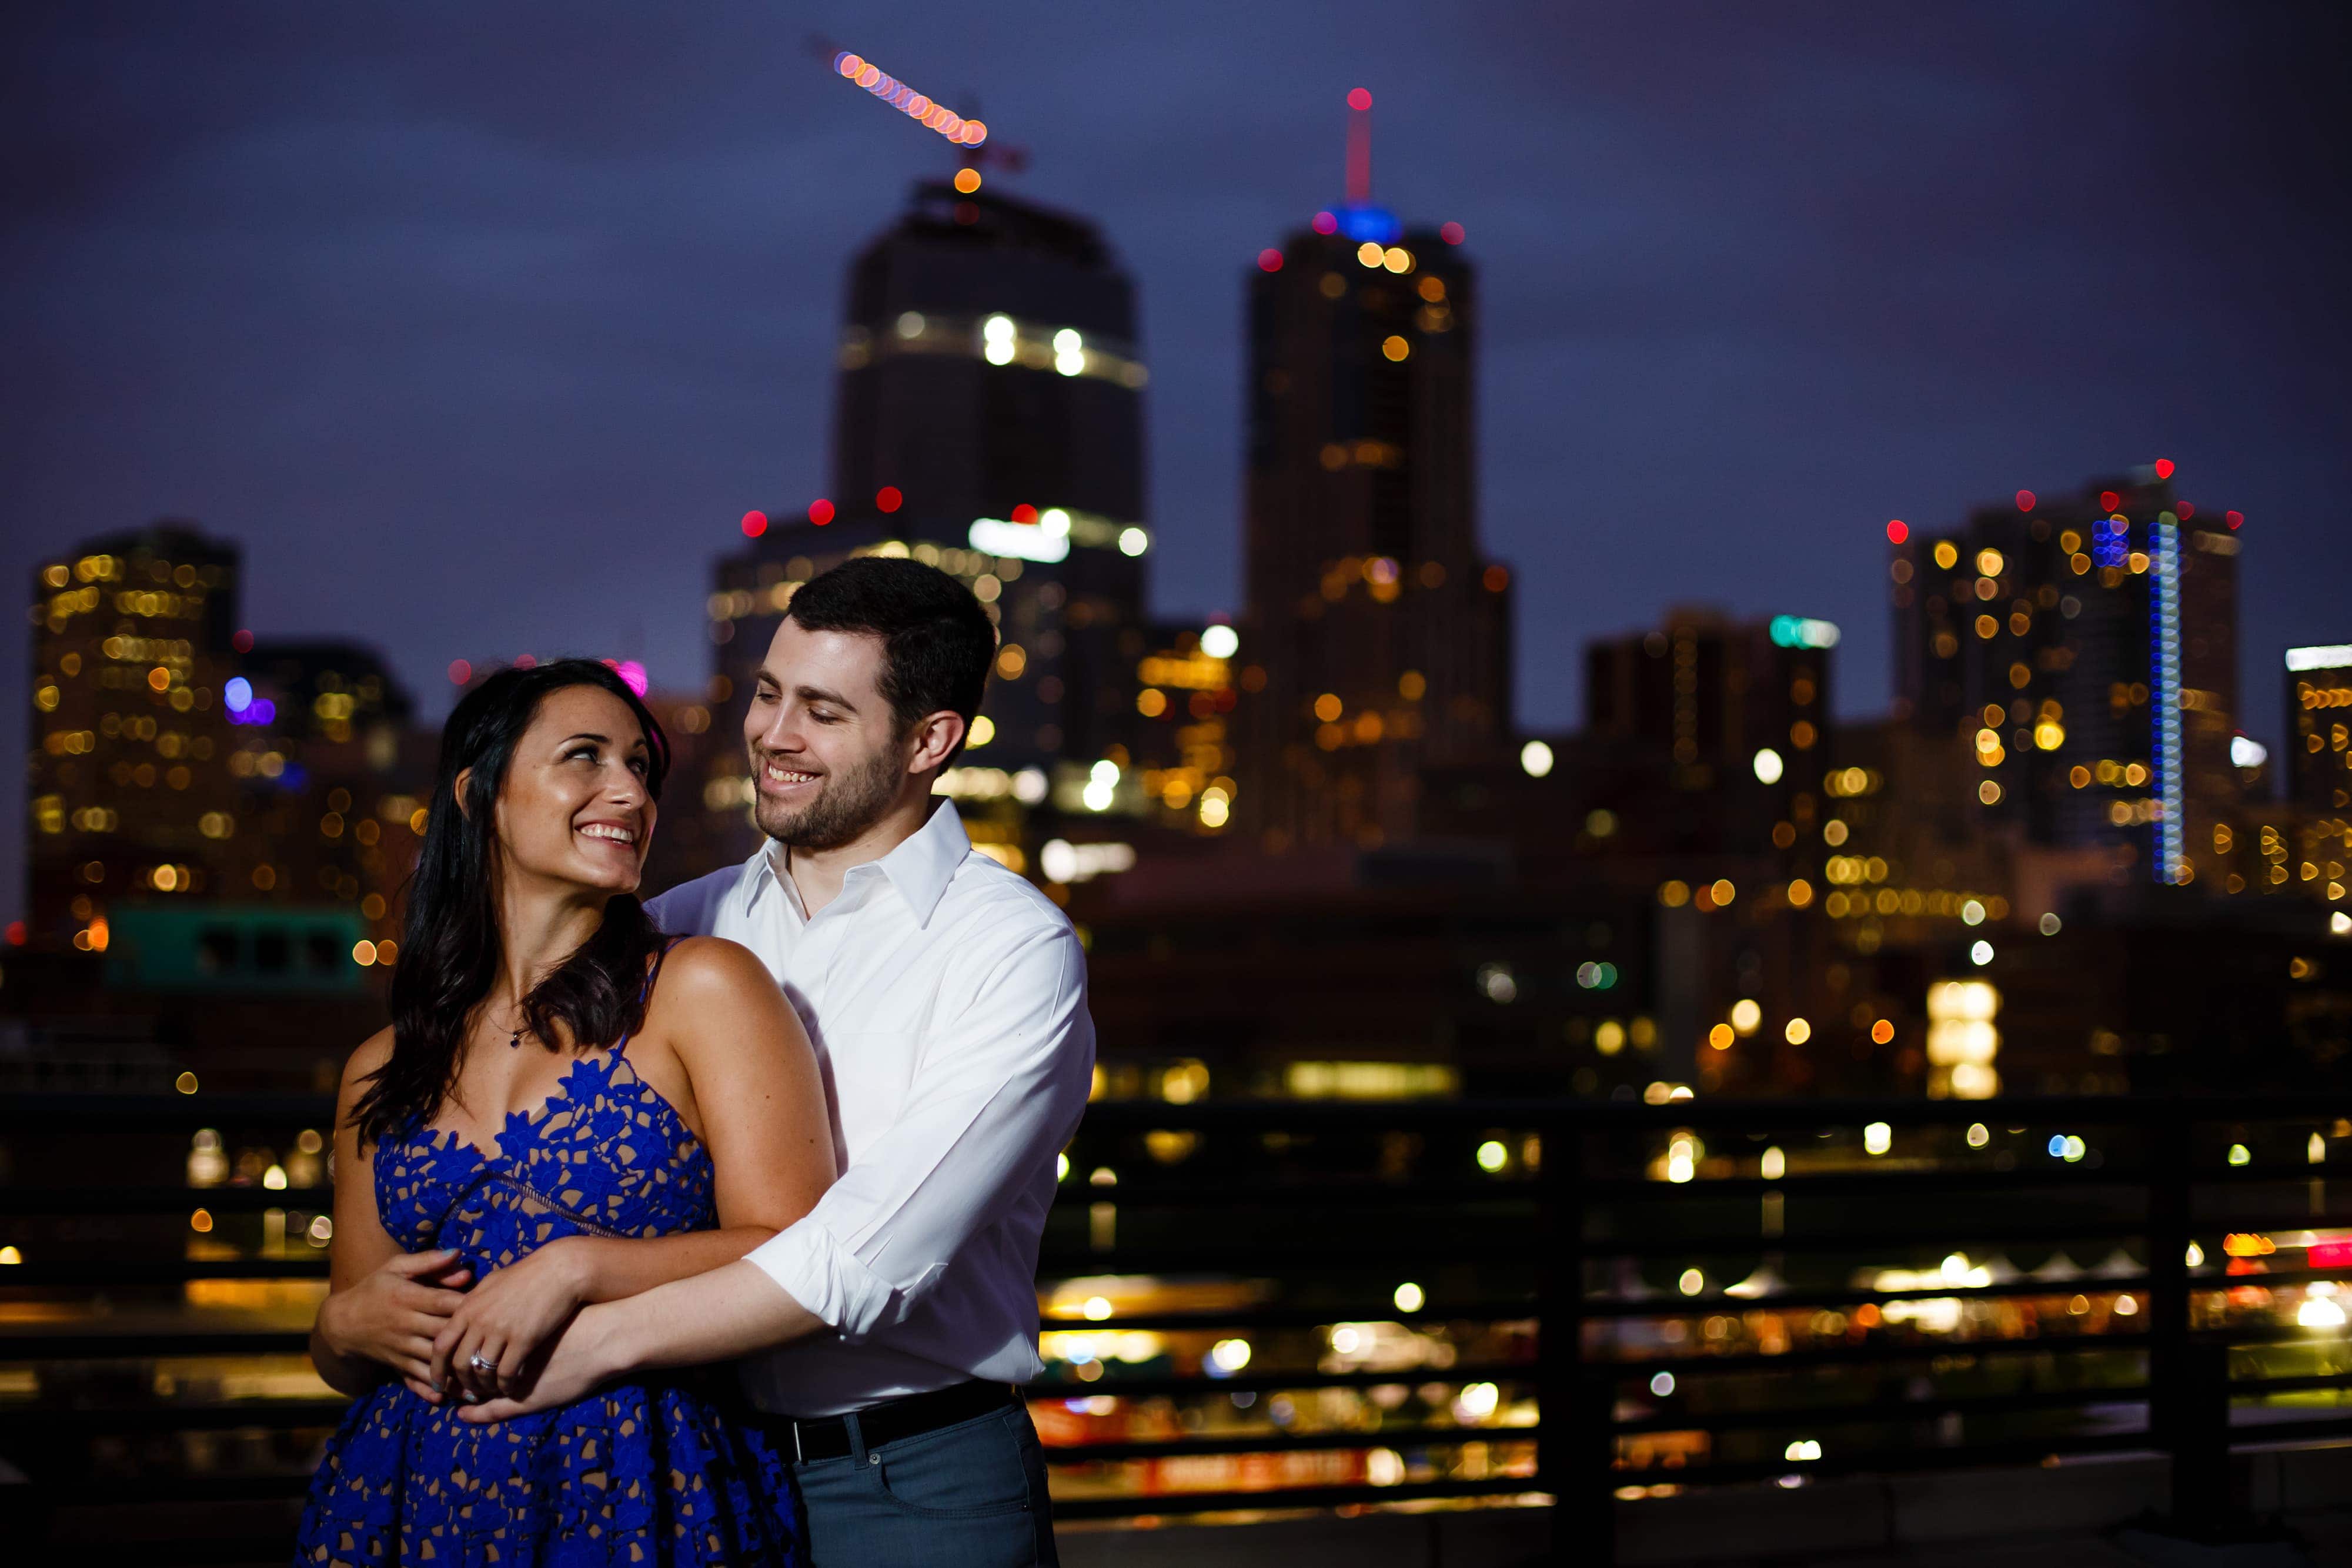 Danielle and Jordan pose together with the Denver skyline in the background during their engagement photos near LoDo